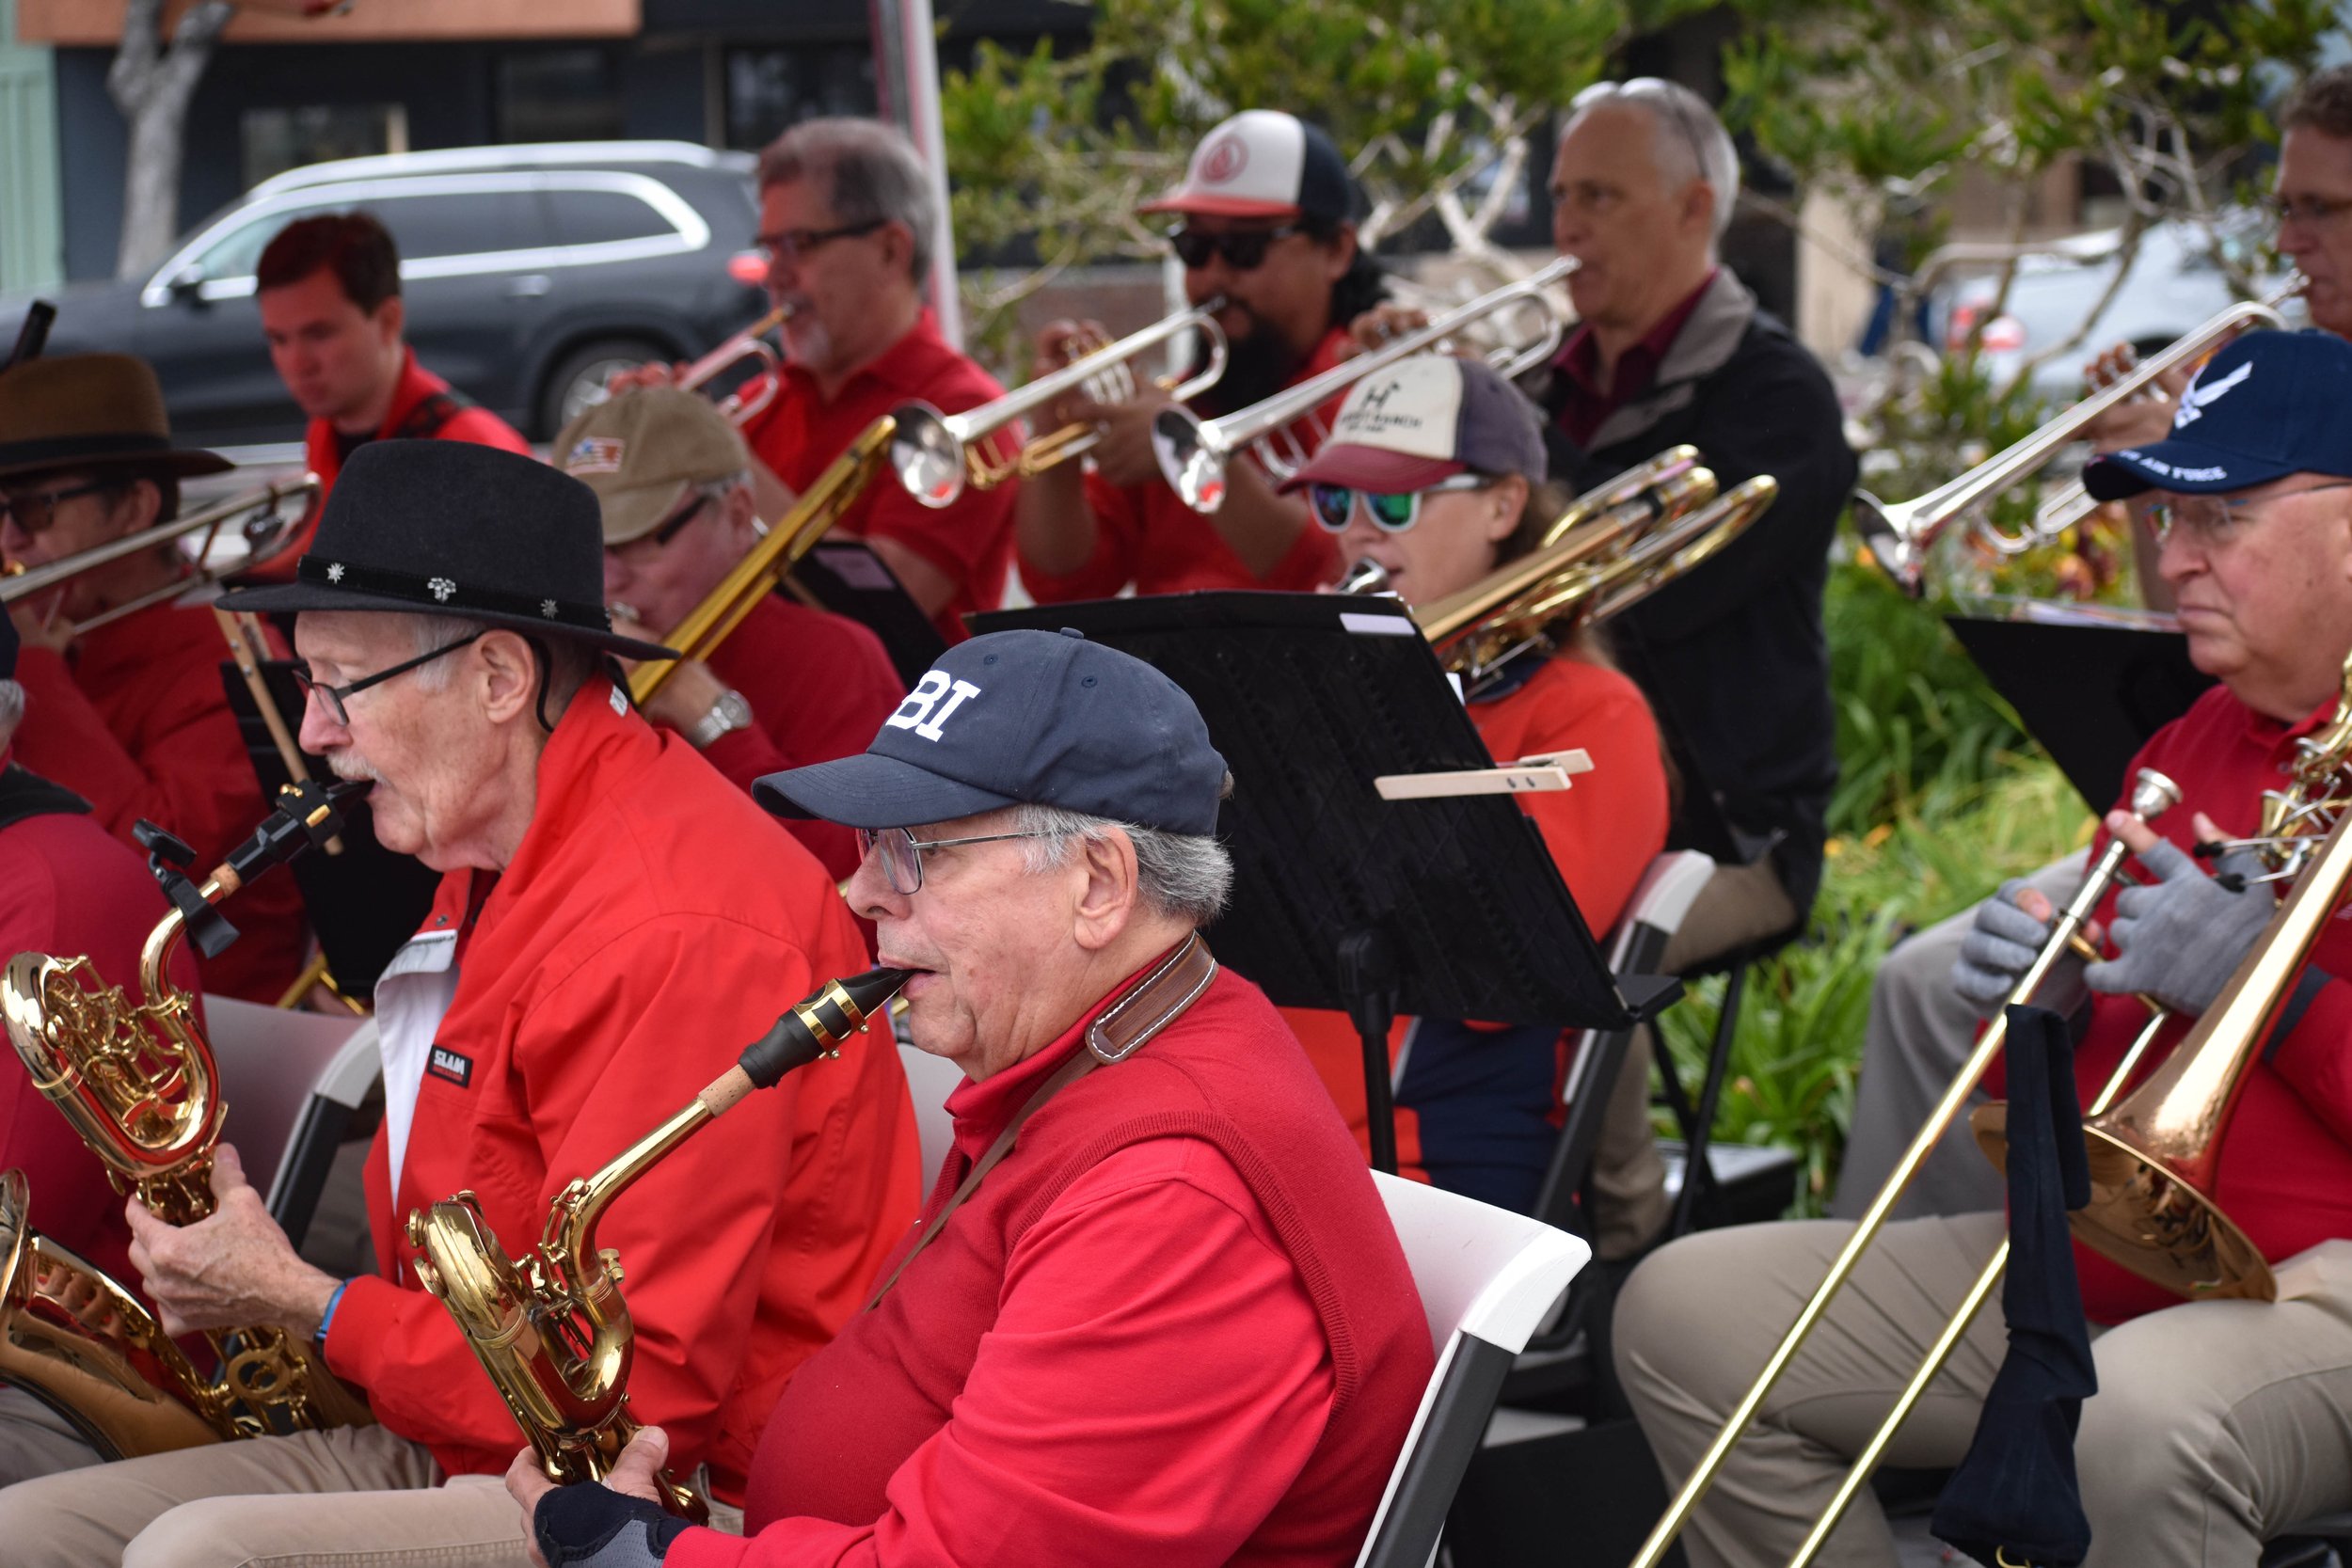 05-29-2023 LCCB and Jazz Band Memorial Day Concerts by Peyton Webster93-25.jpg